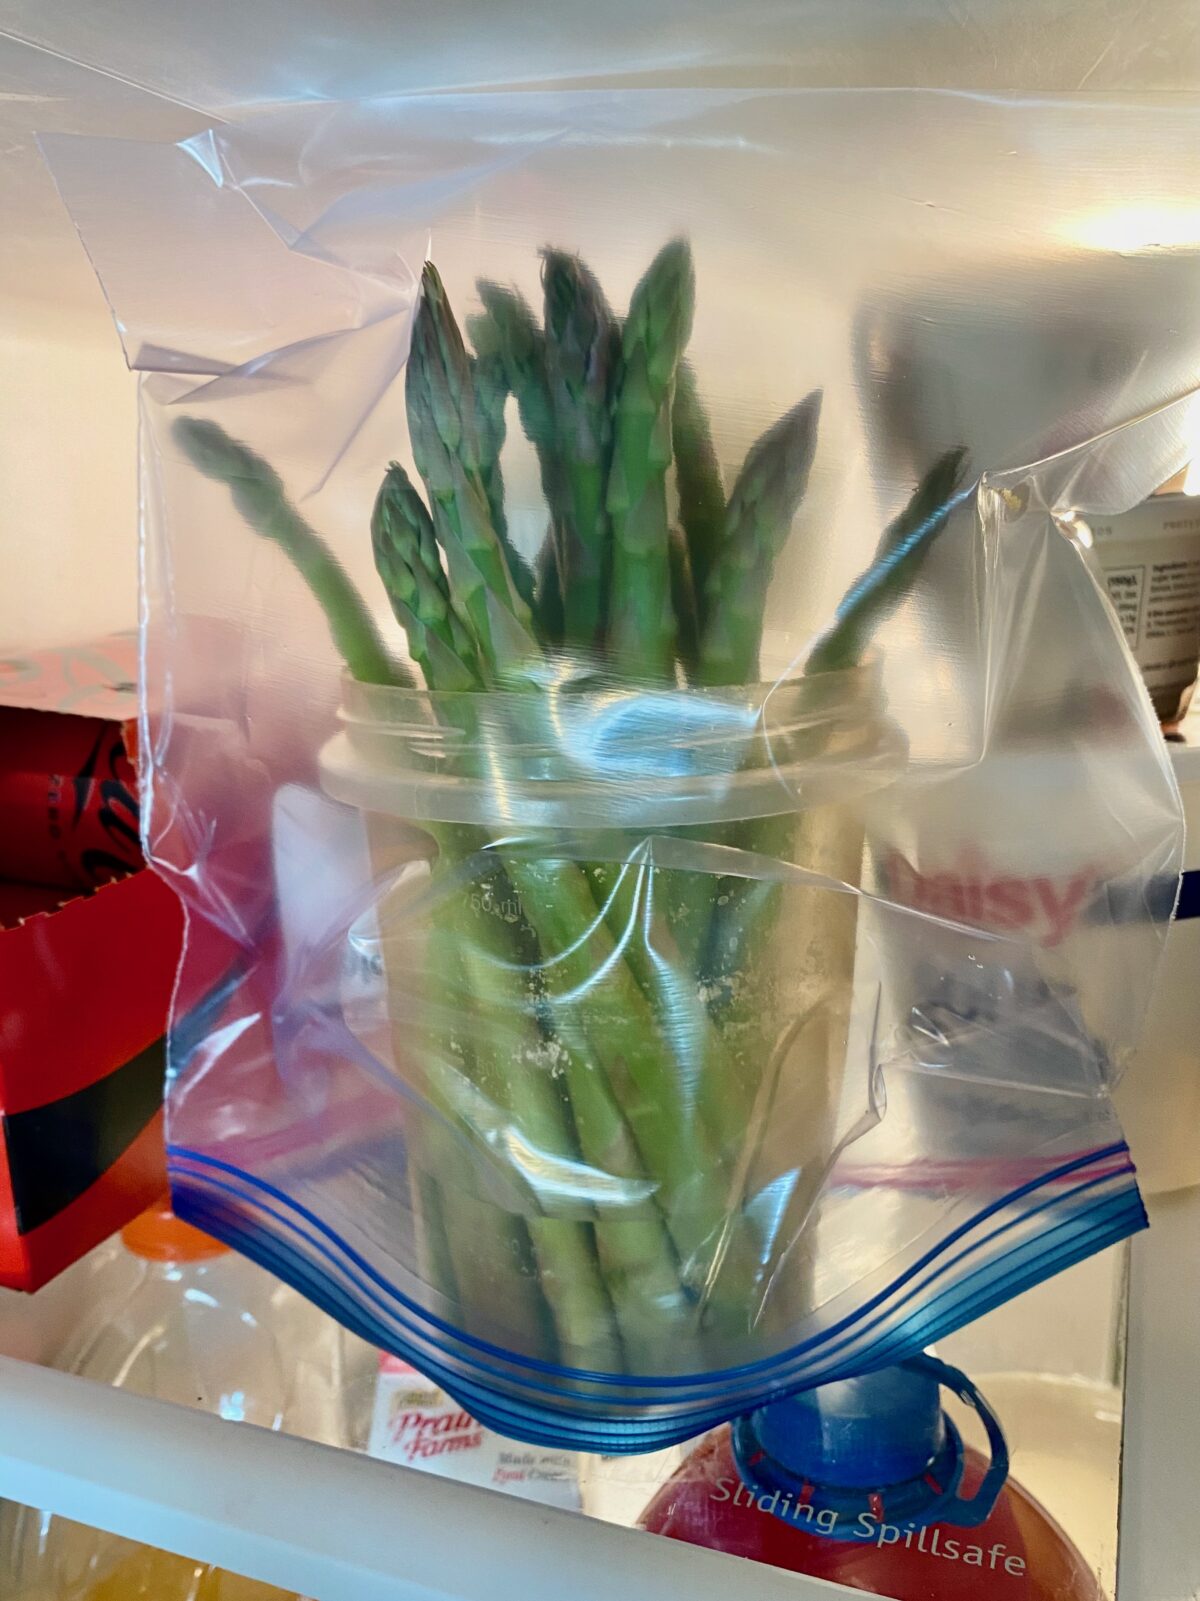 Trimmed asparagus that has been  placed into container with one inch of water and covered loosely with plastic bag sitting on a shelf in a refrigerator.